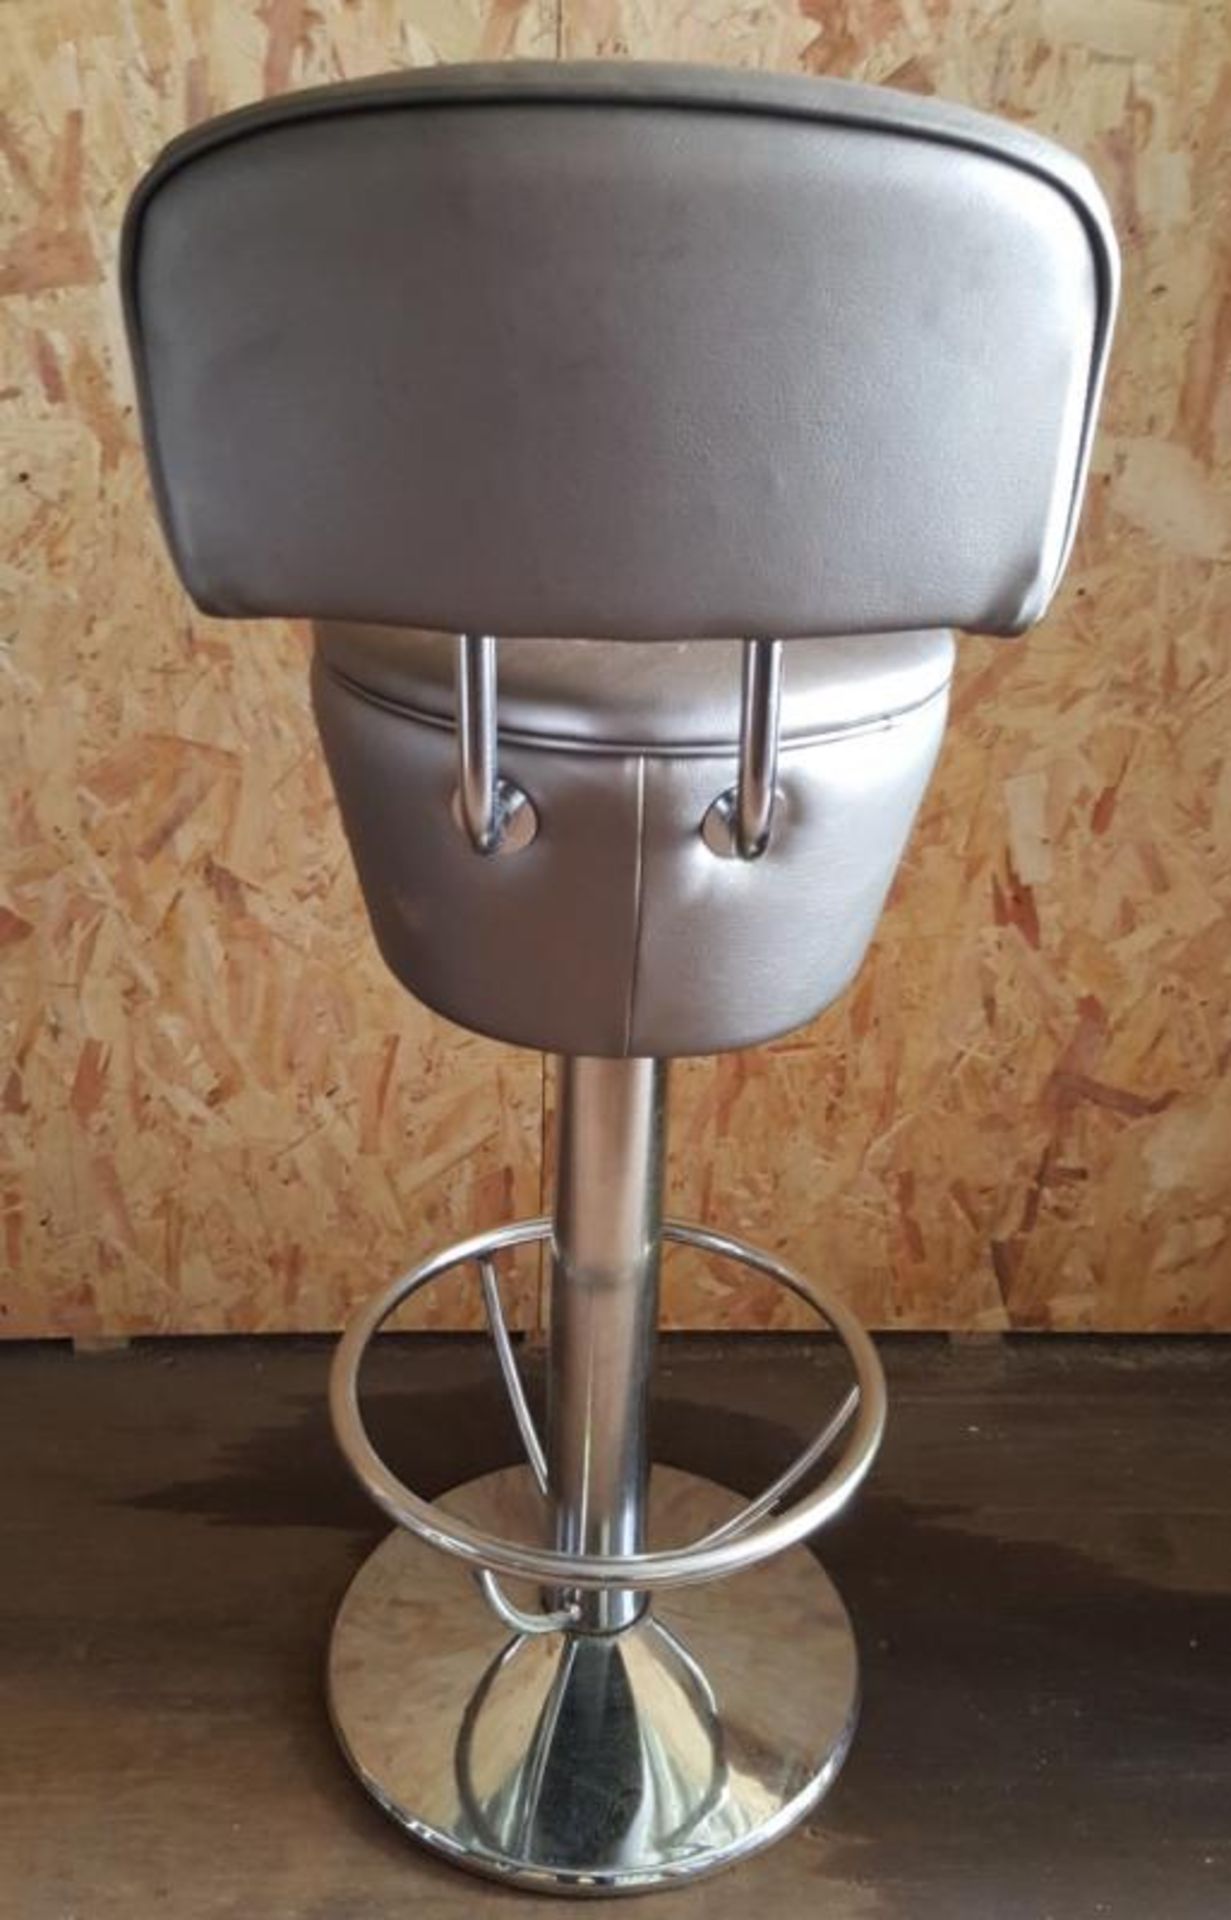 A Set Of 3 Bespoke Chrome Based Bar Stools With Dark Sliver Faux Leather Seat &amp; Back - Ref BY264 - Image 5 of 5